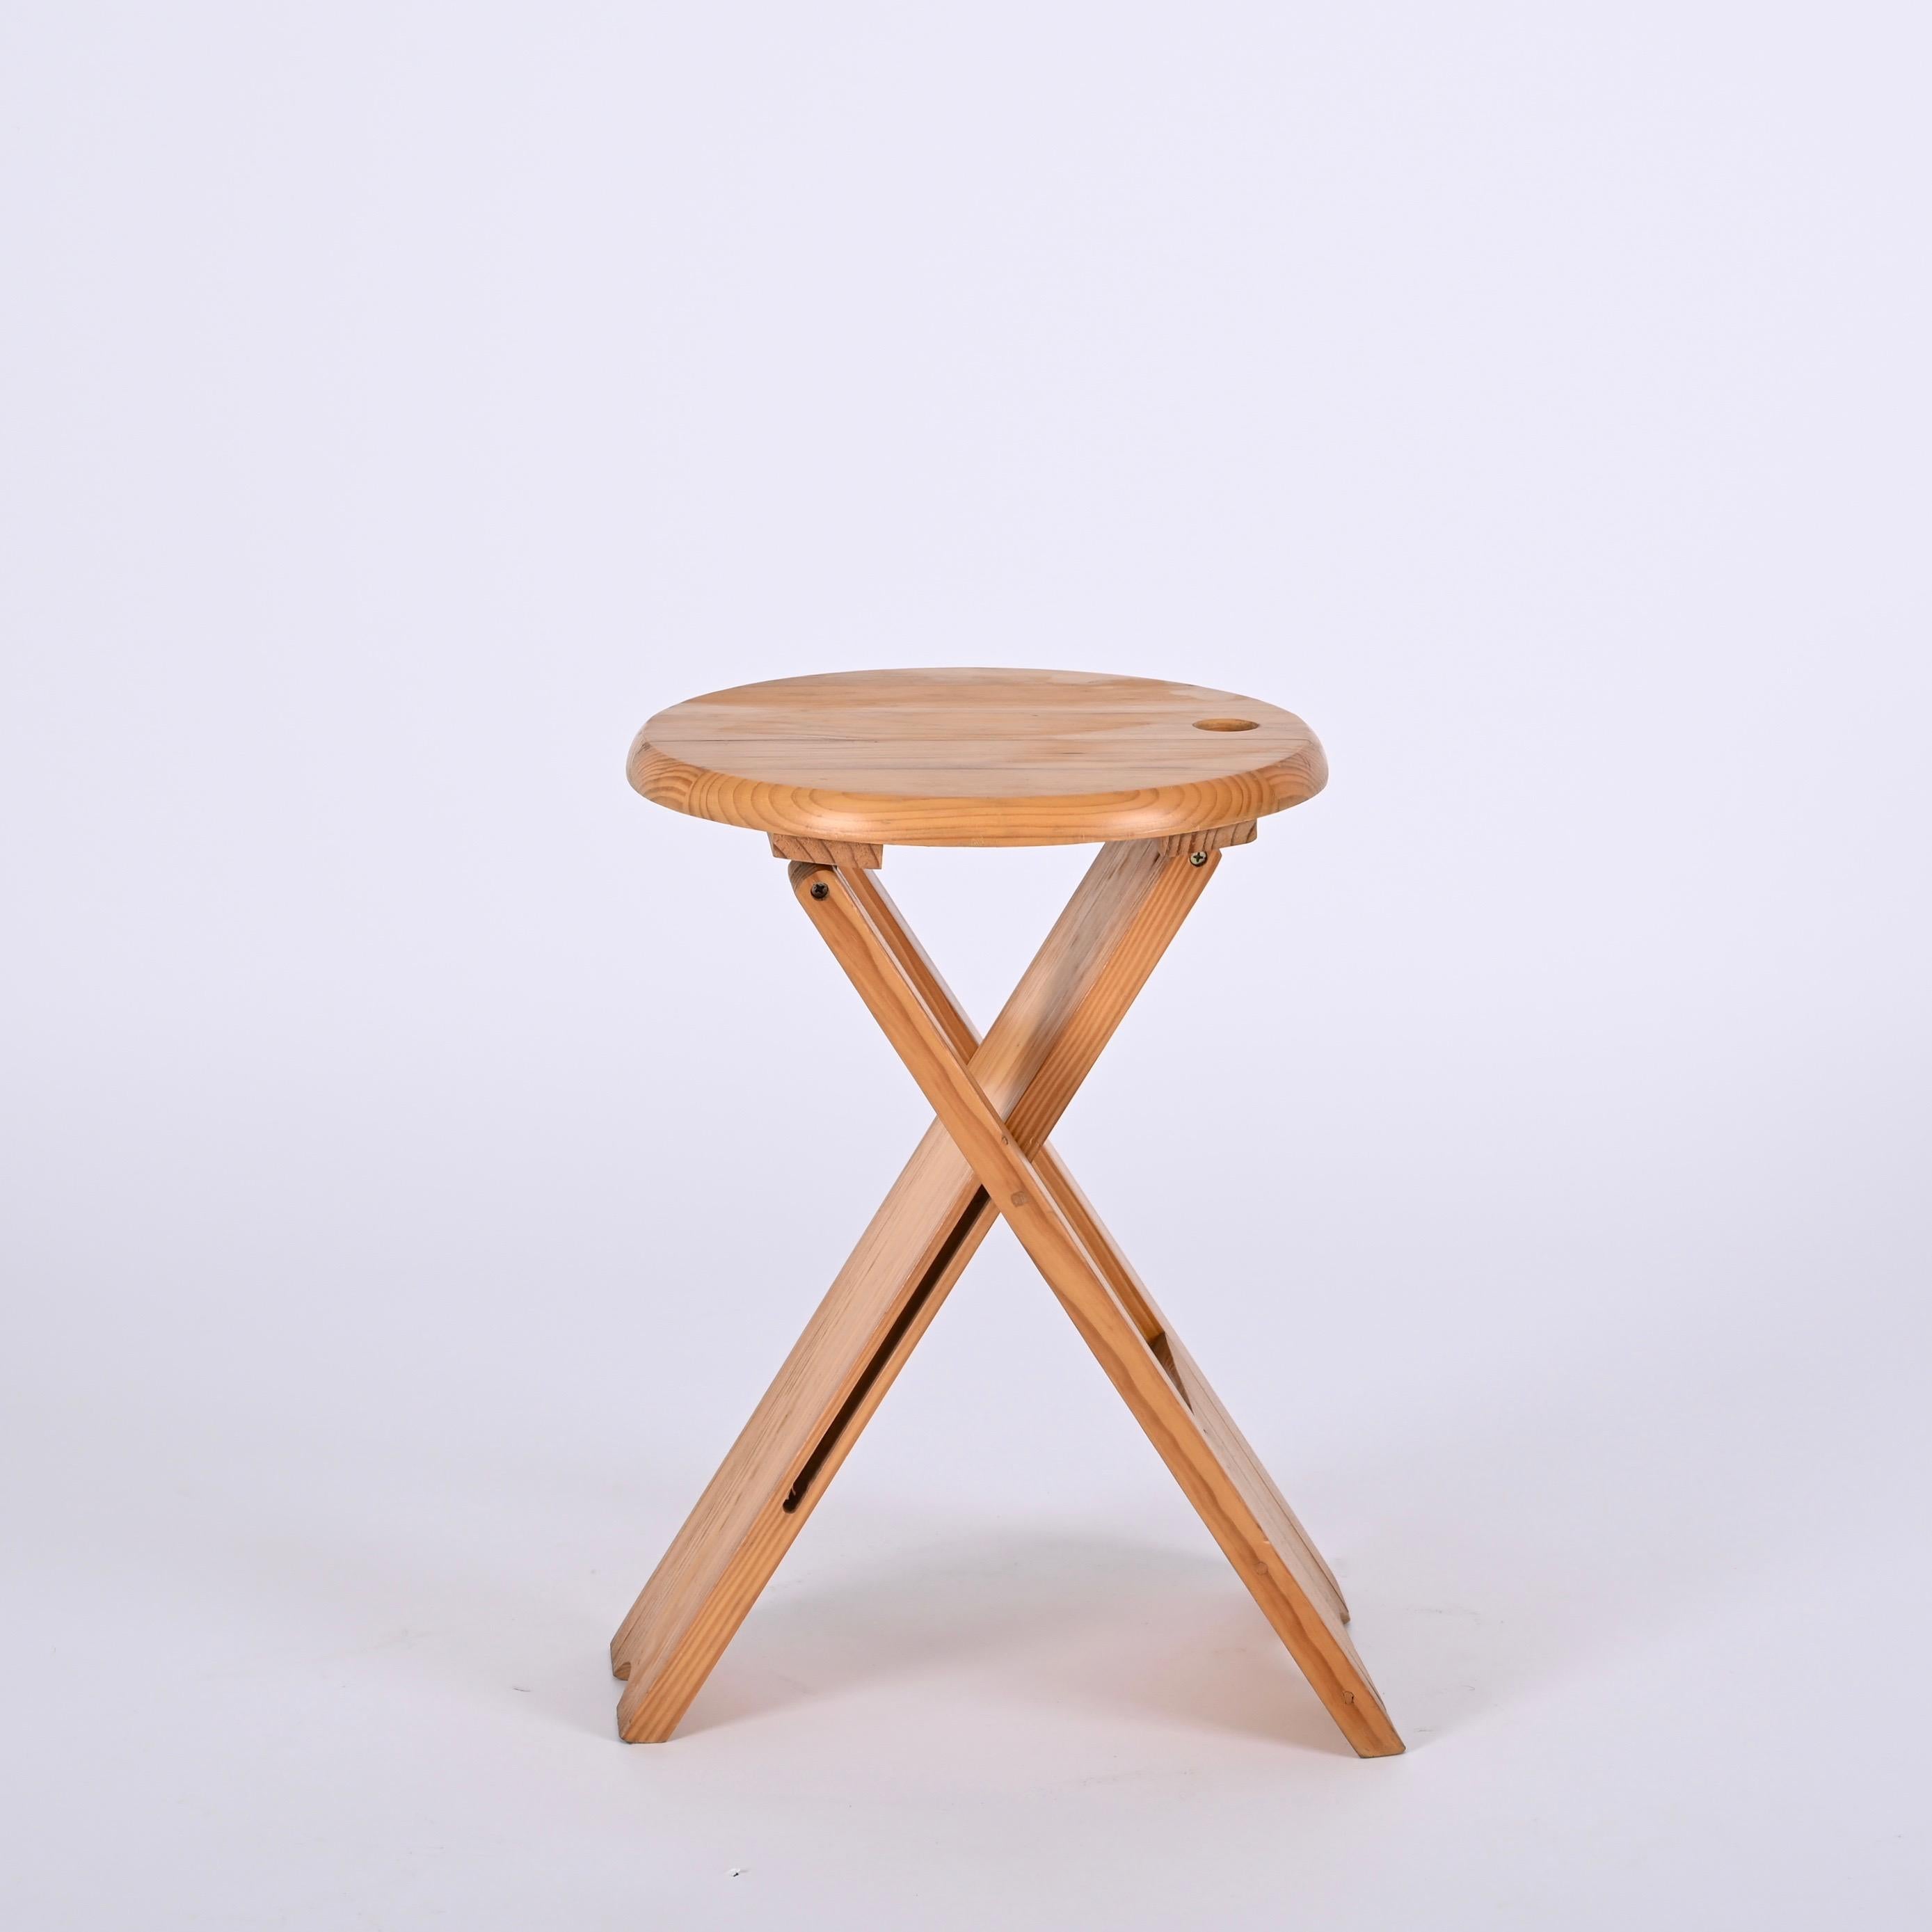 Wood Mid-Century Ts Folding Stool by Roger Tallon for Sentou, France 1970s For Sale